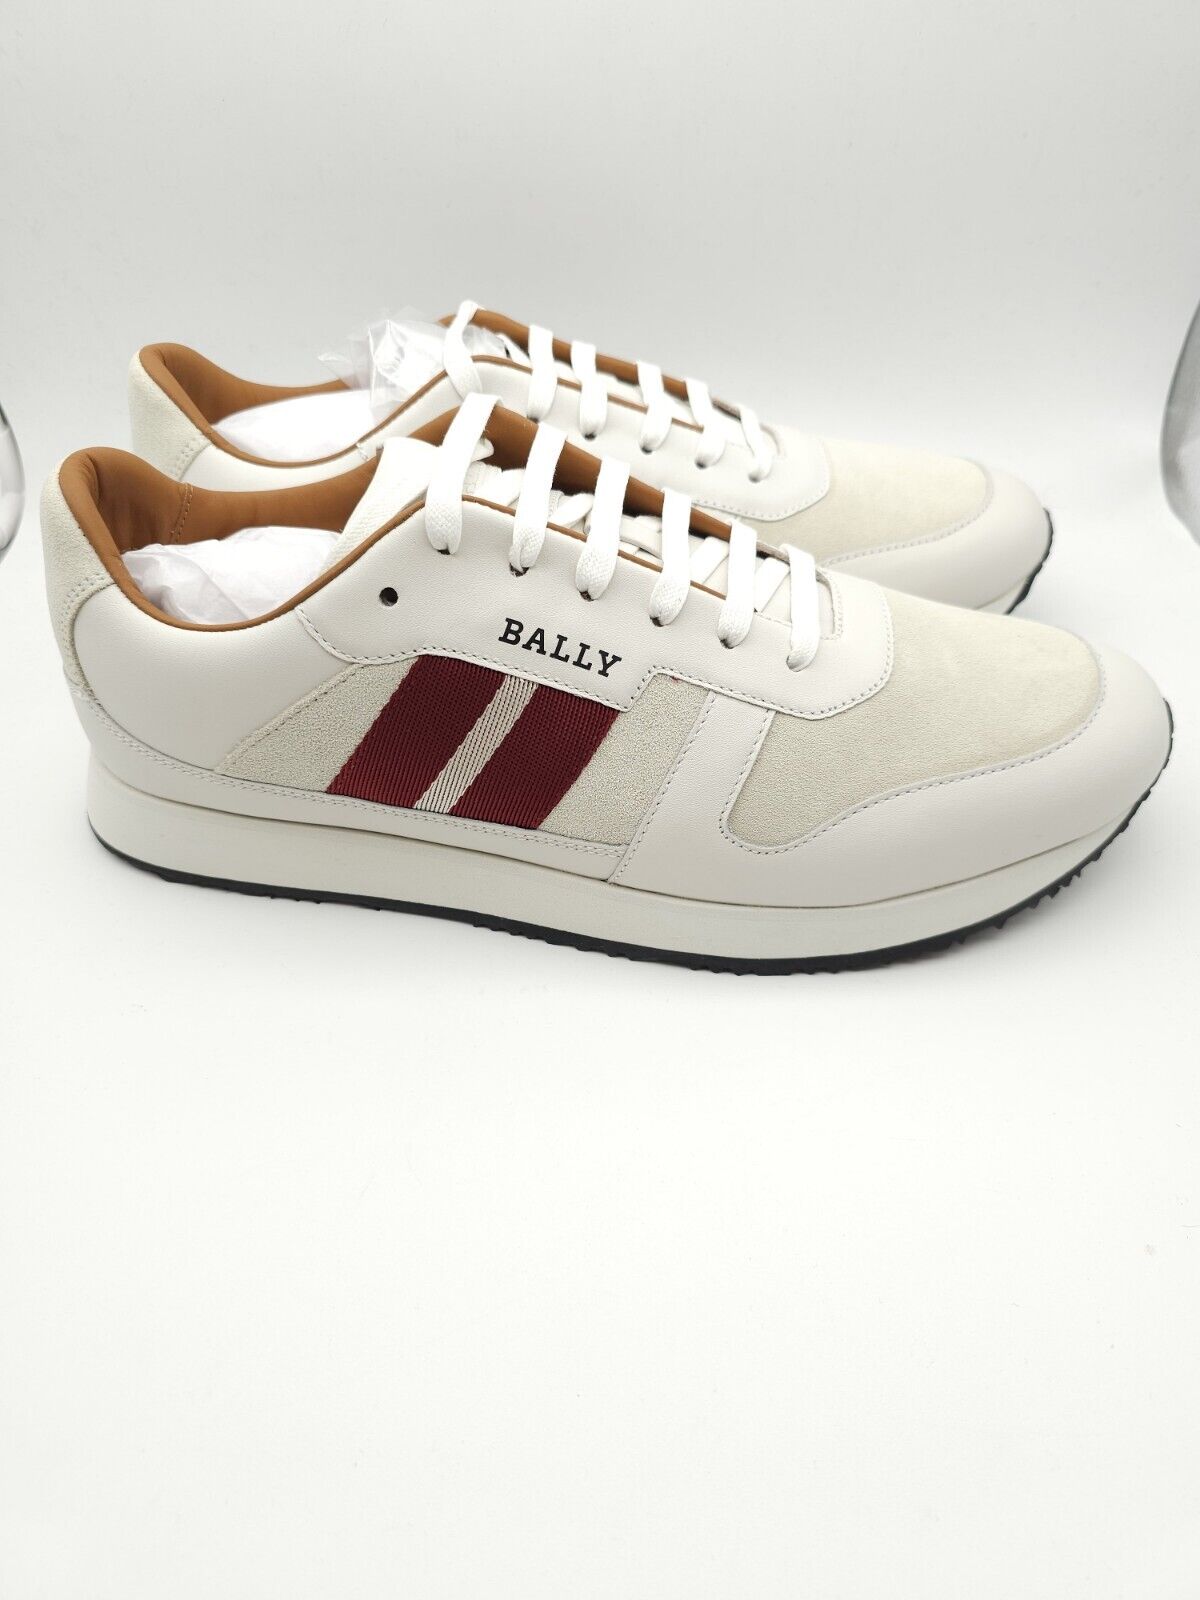 Bally Sprinter Calf Plain Leather Suede Sneaker Shoes White US 12 $650 GL023064